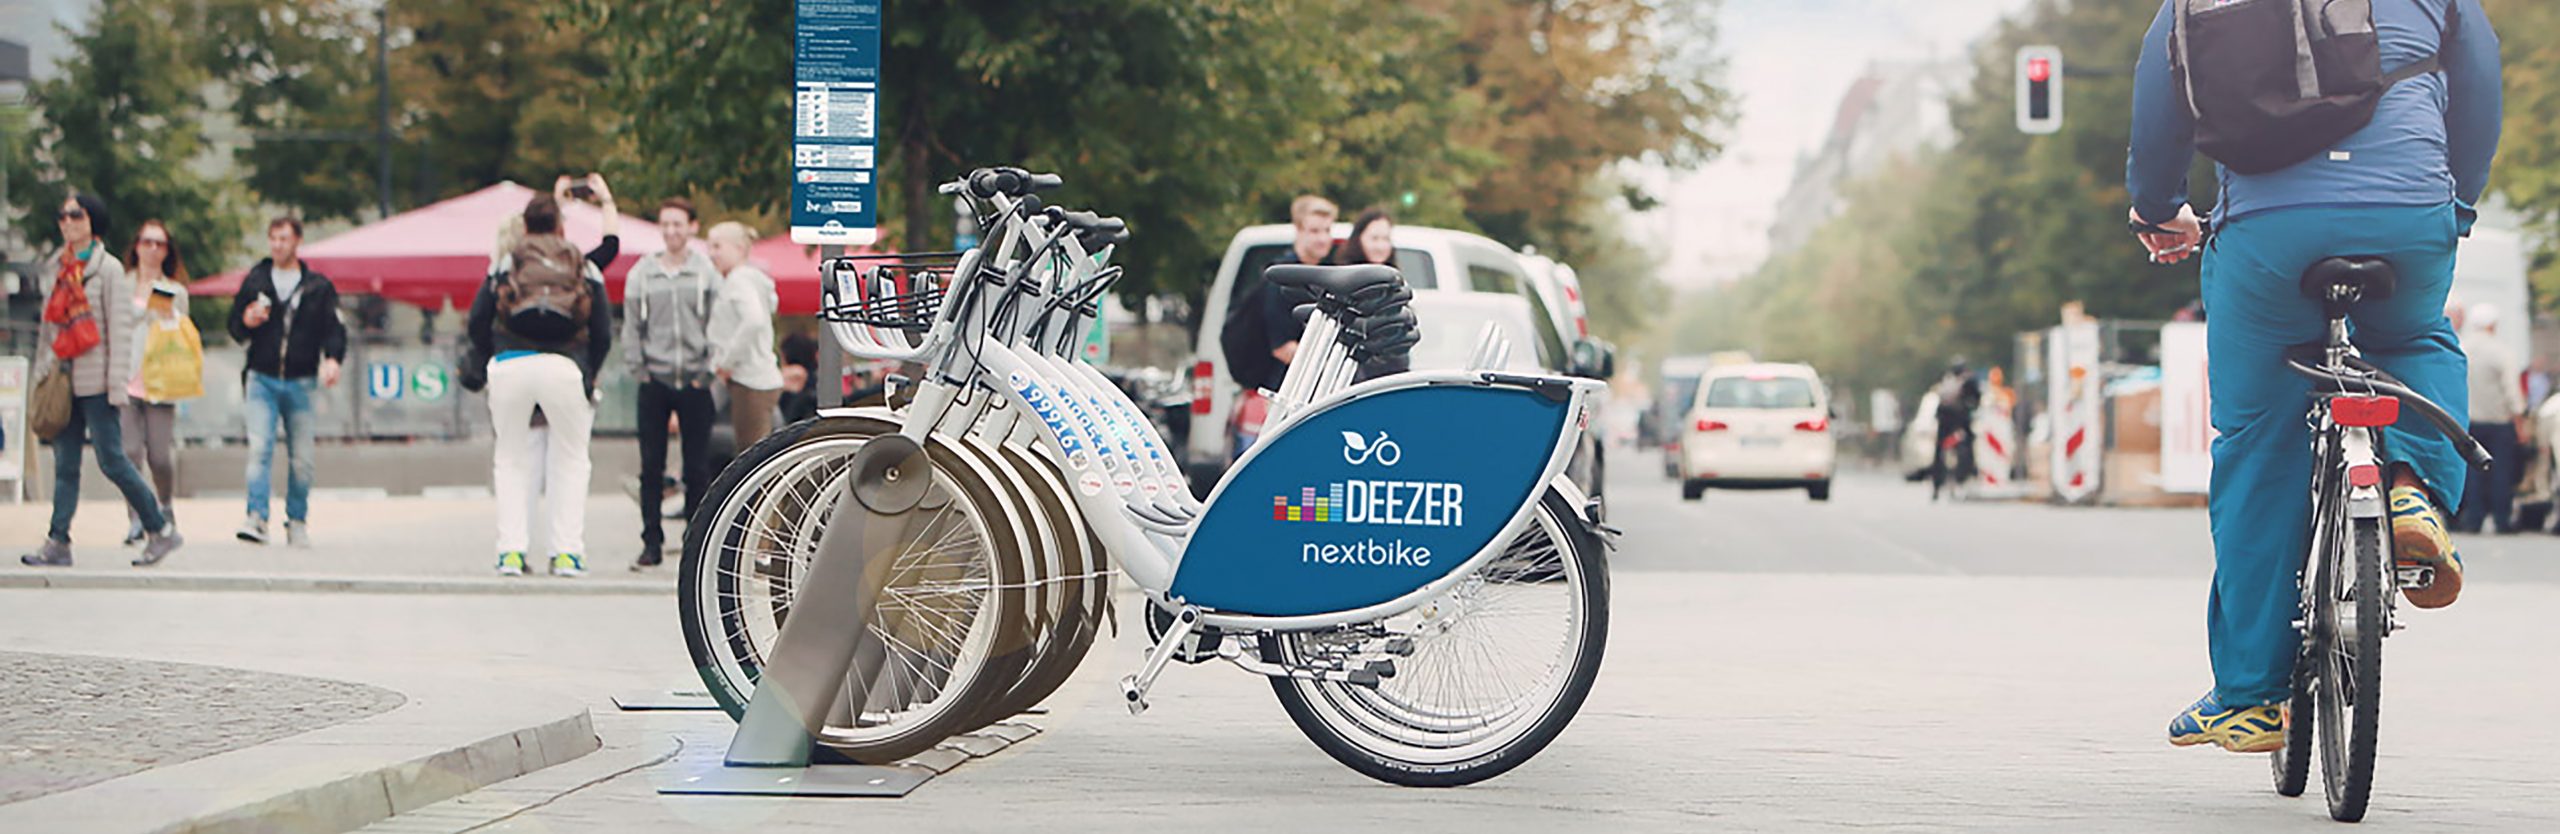 nextbike was awarded the tender for the bicycle rental system in Berlin with Leinemann support against strong competition.